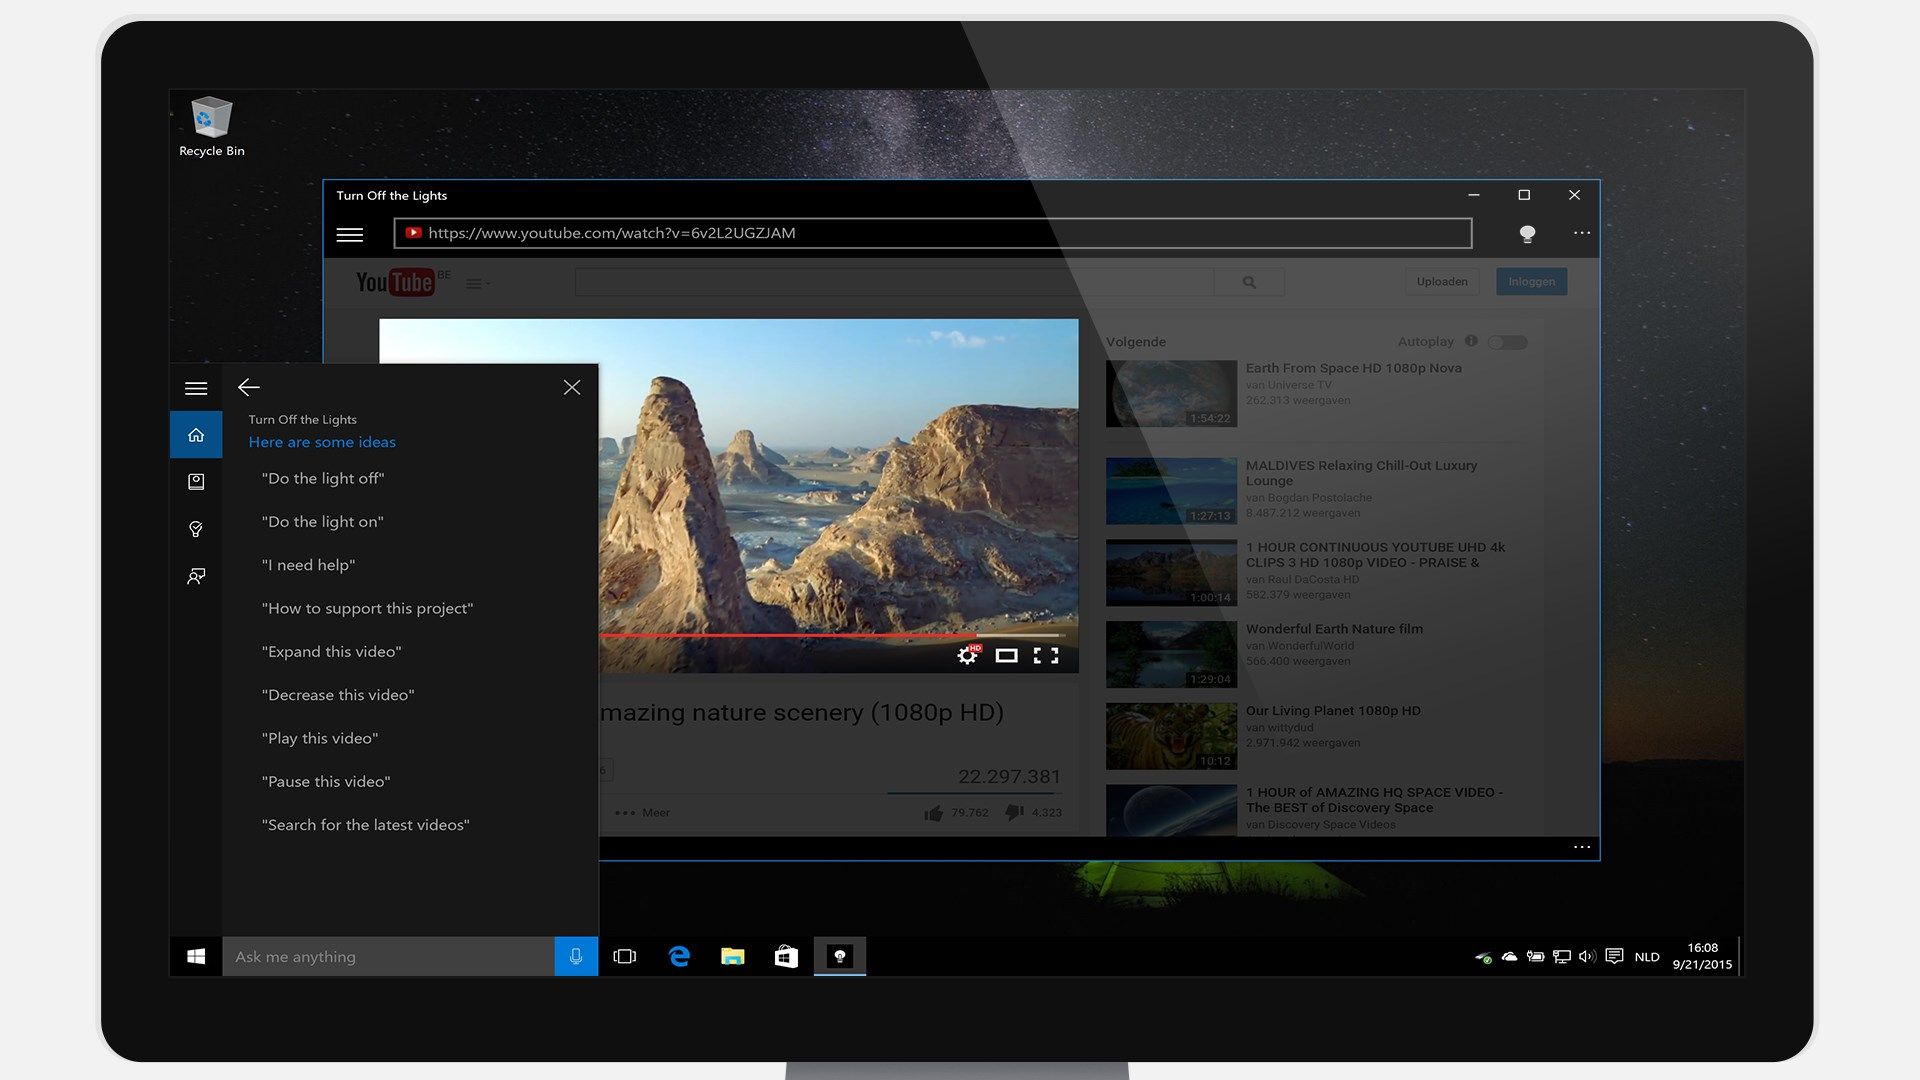 Turn Off the Lights with Cortana support - You can ask to dim the lights or play this YouTube video.